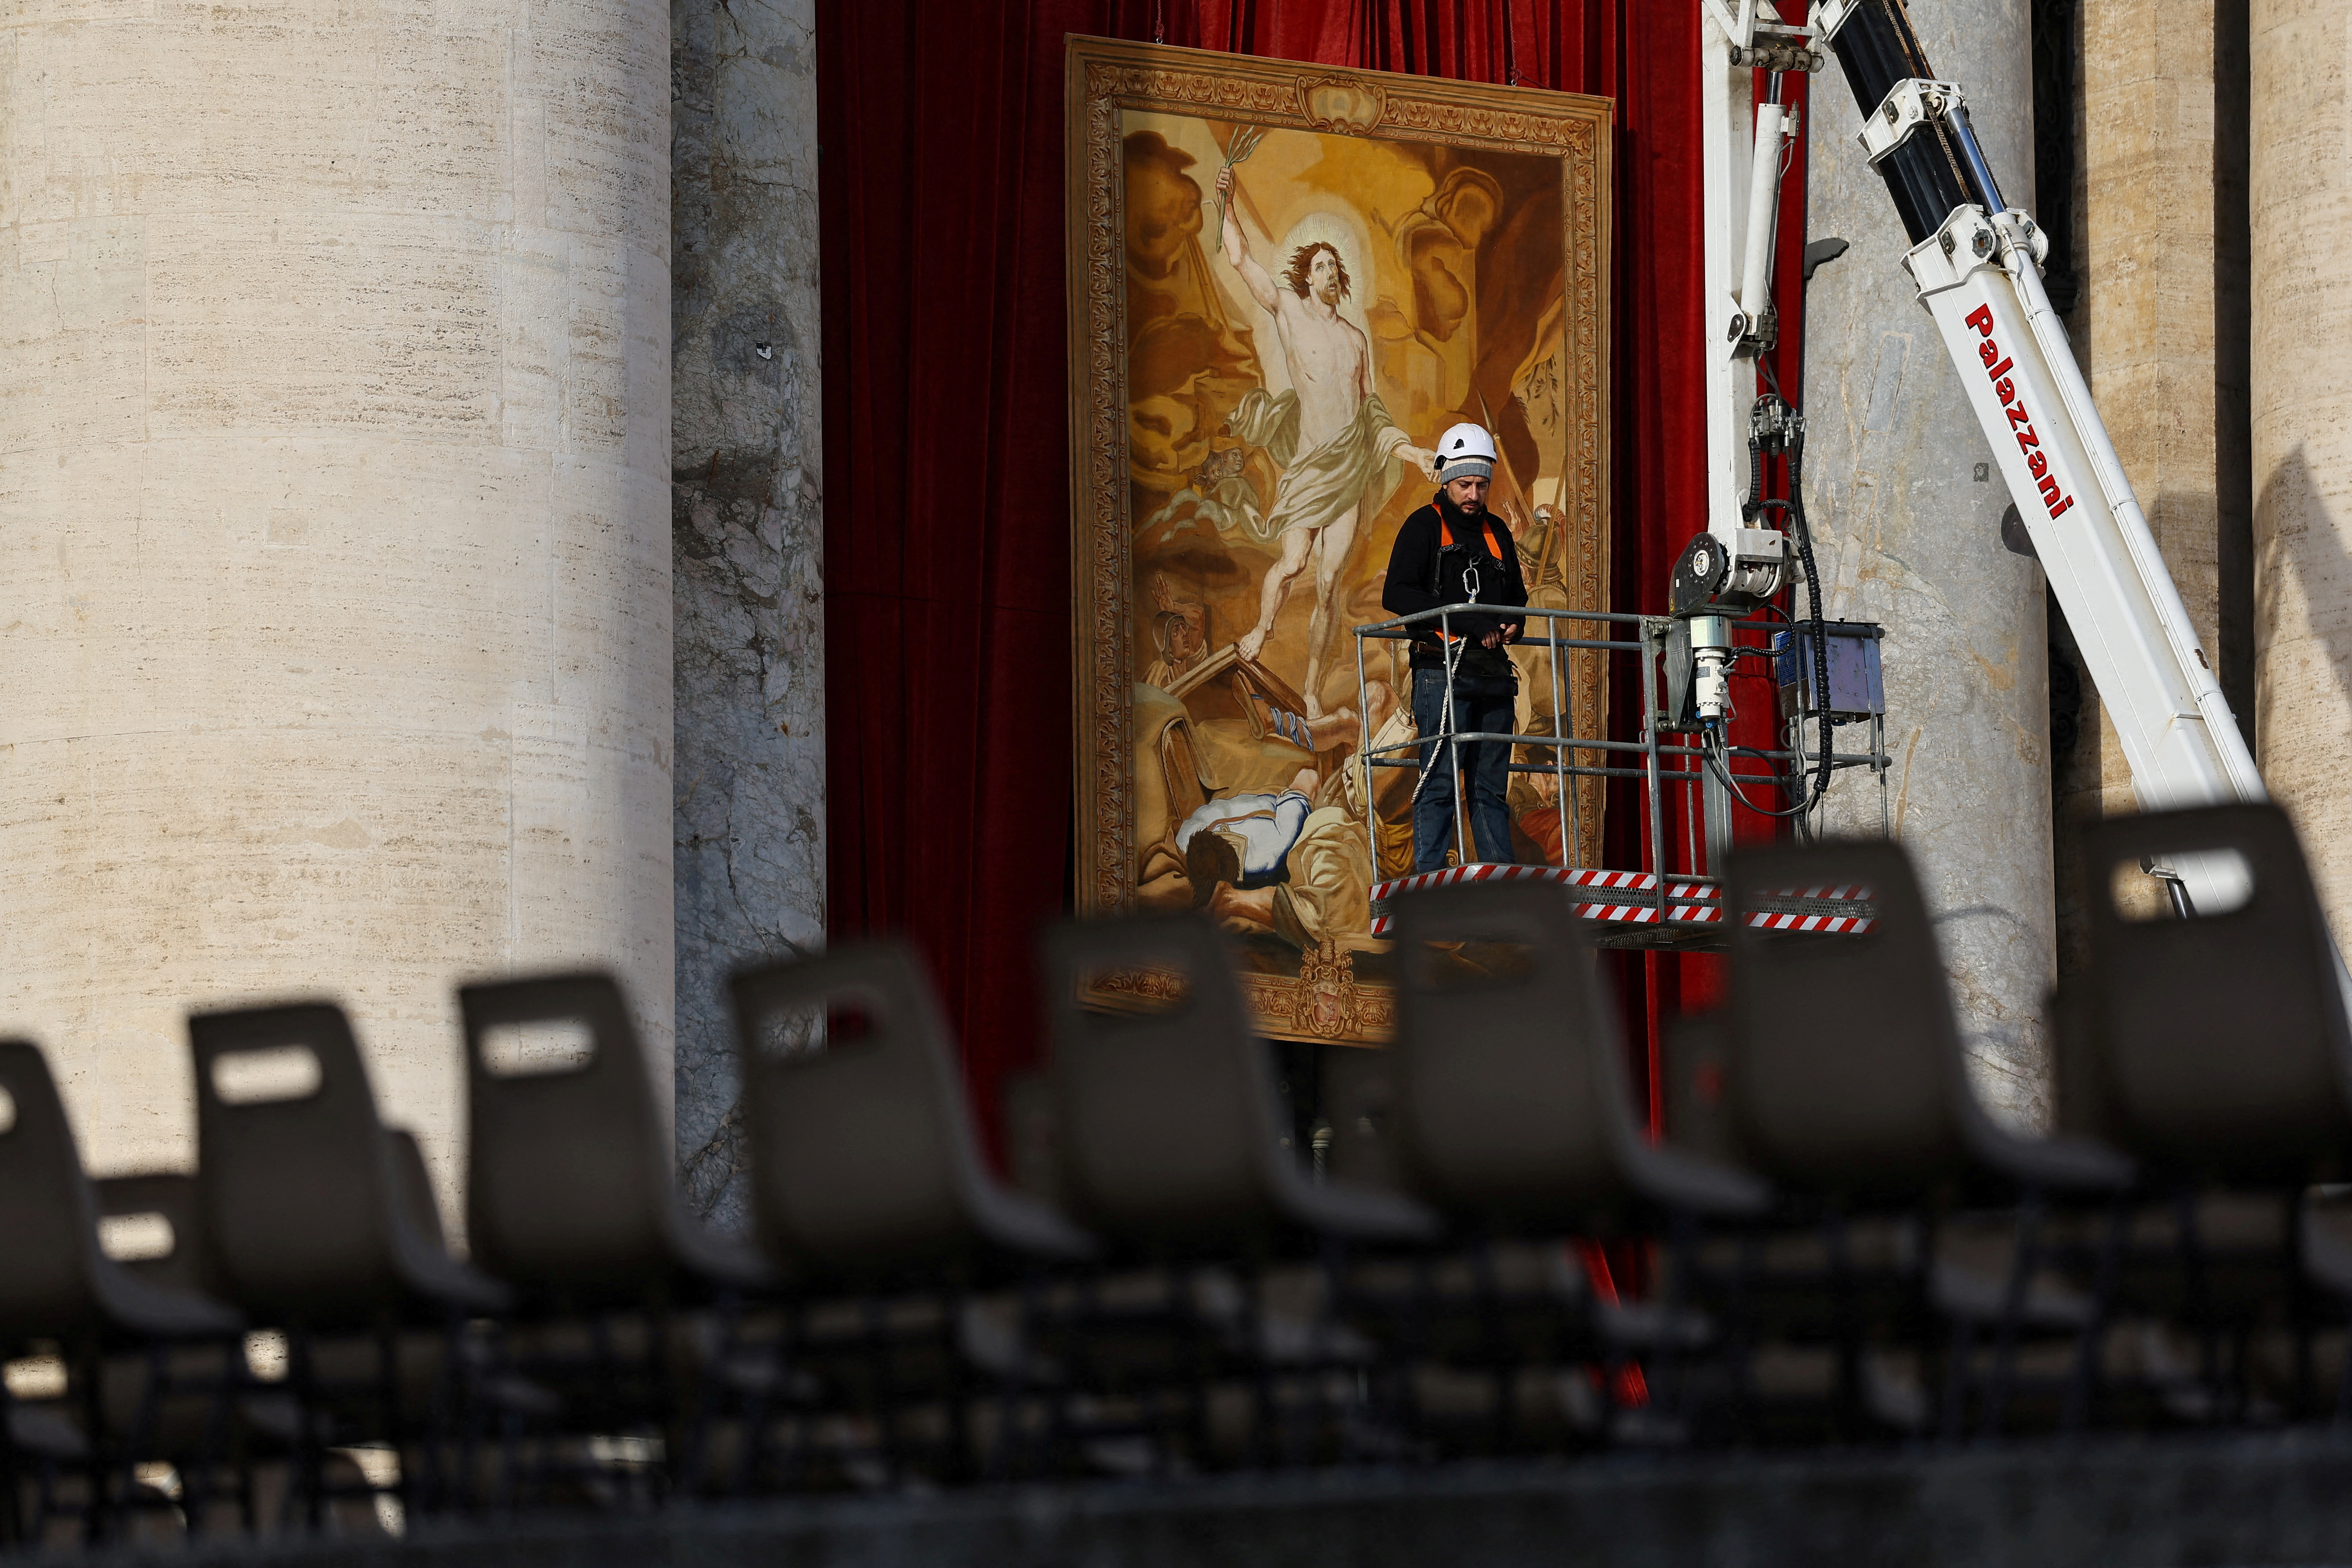 People pay homage to former Pope Benedict, at the Vatican